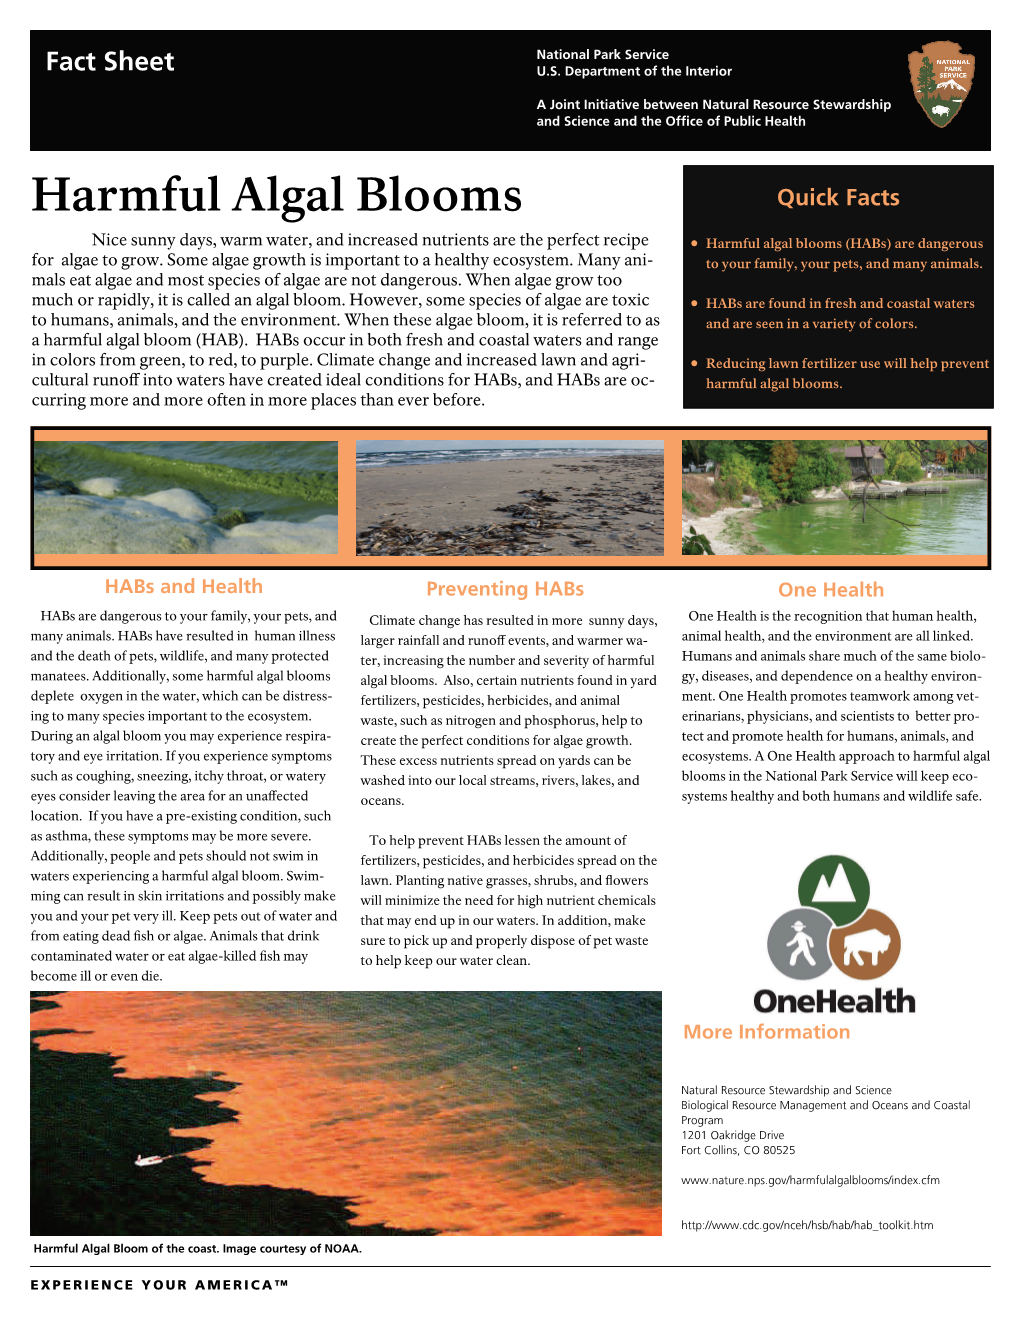 Harmful Algal Blooms Quick Facts